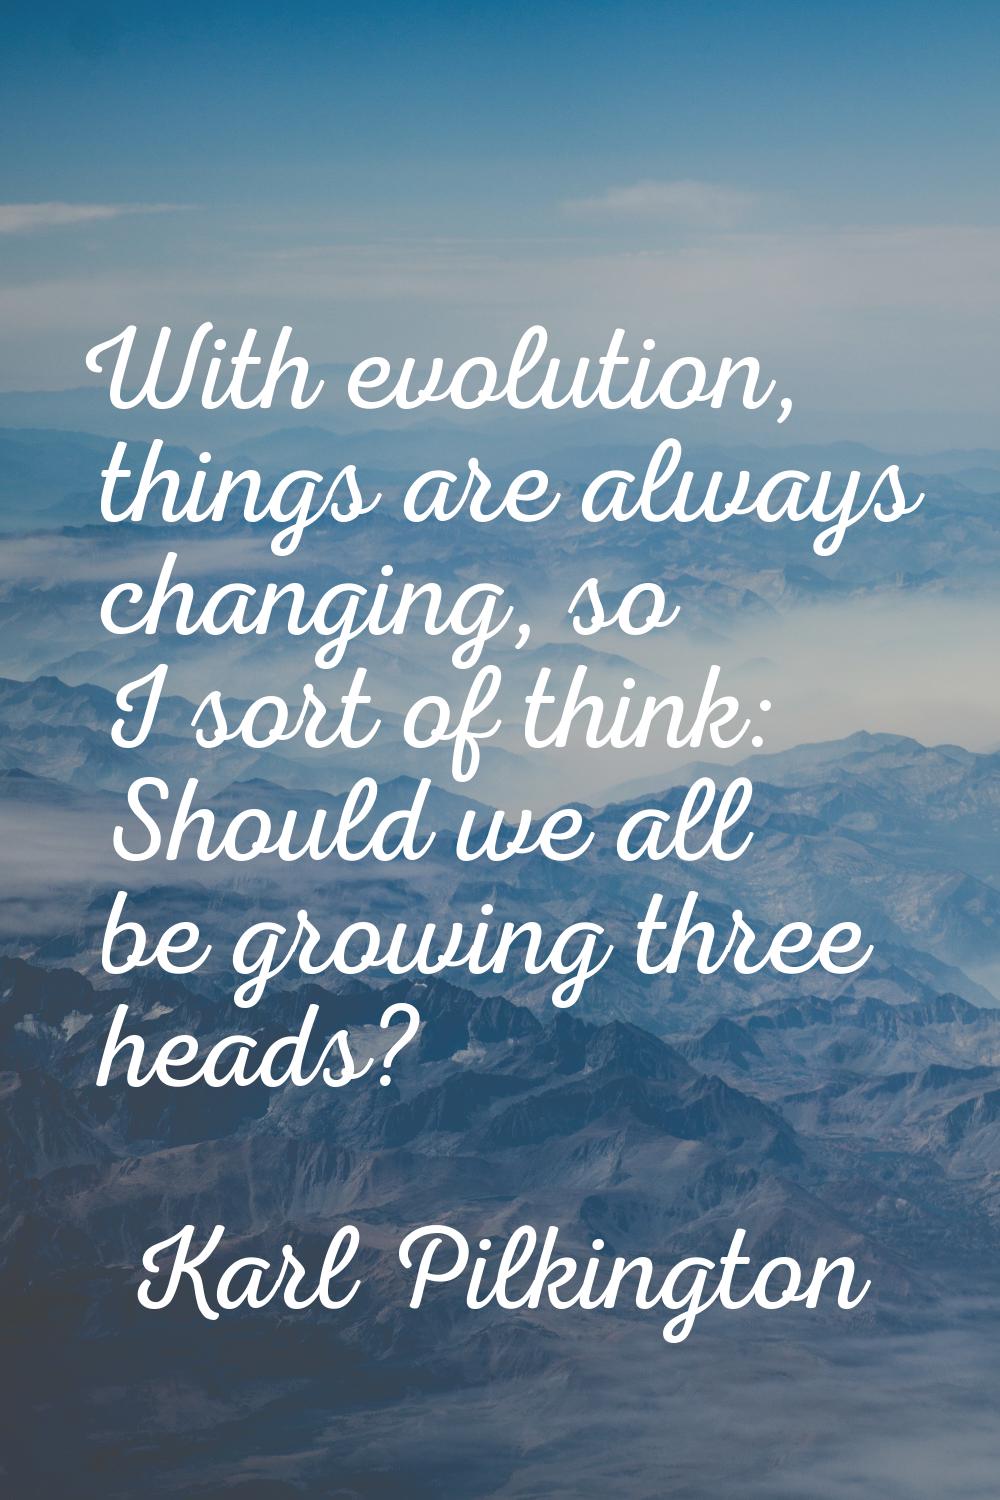 With evolution, things are always changing, so I sort of think: Should we all be growing three head